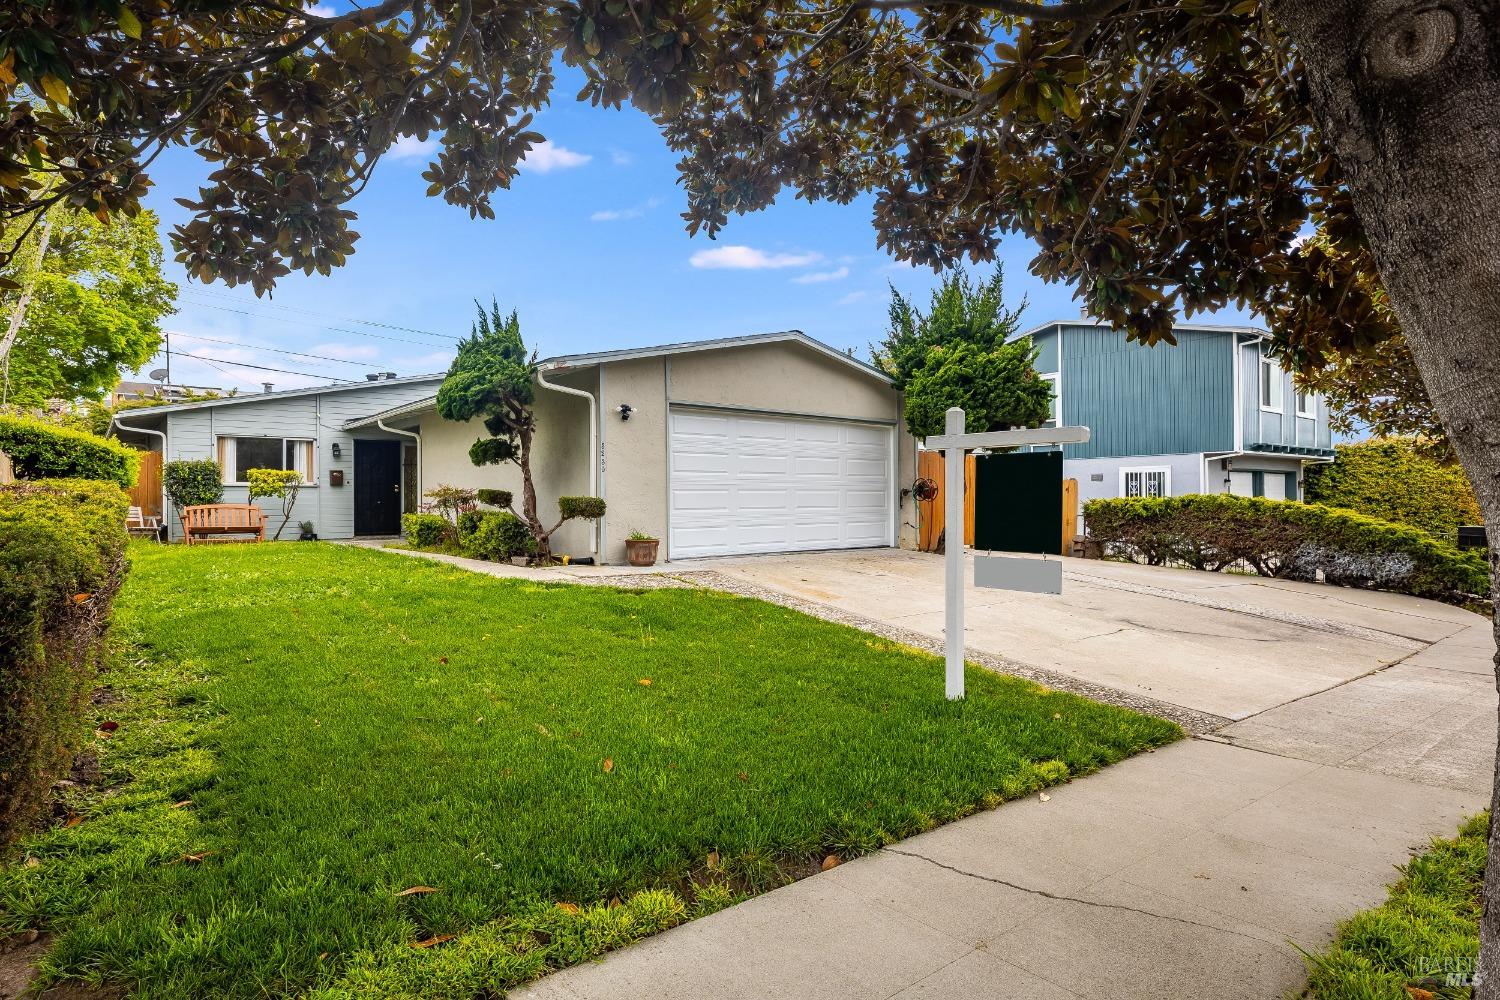 Photo of 5230 Fleming Ave in Richmond, CA